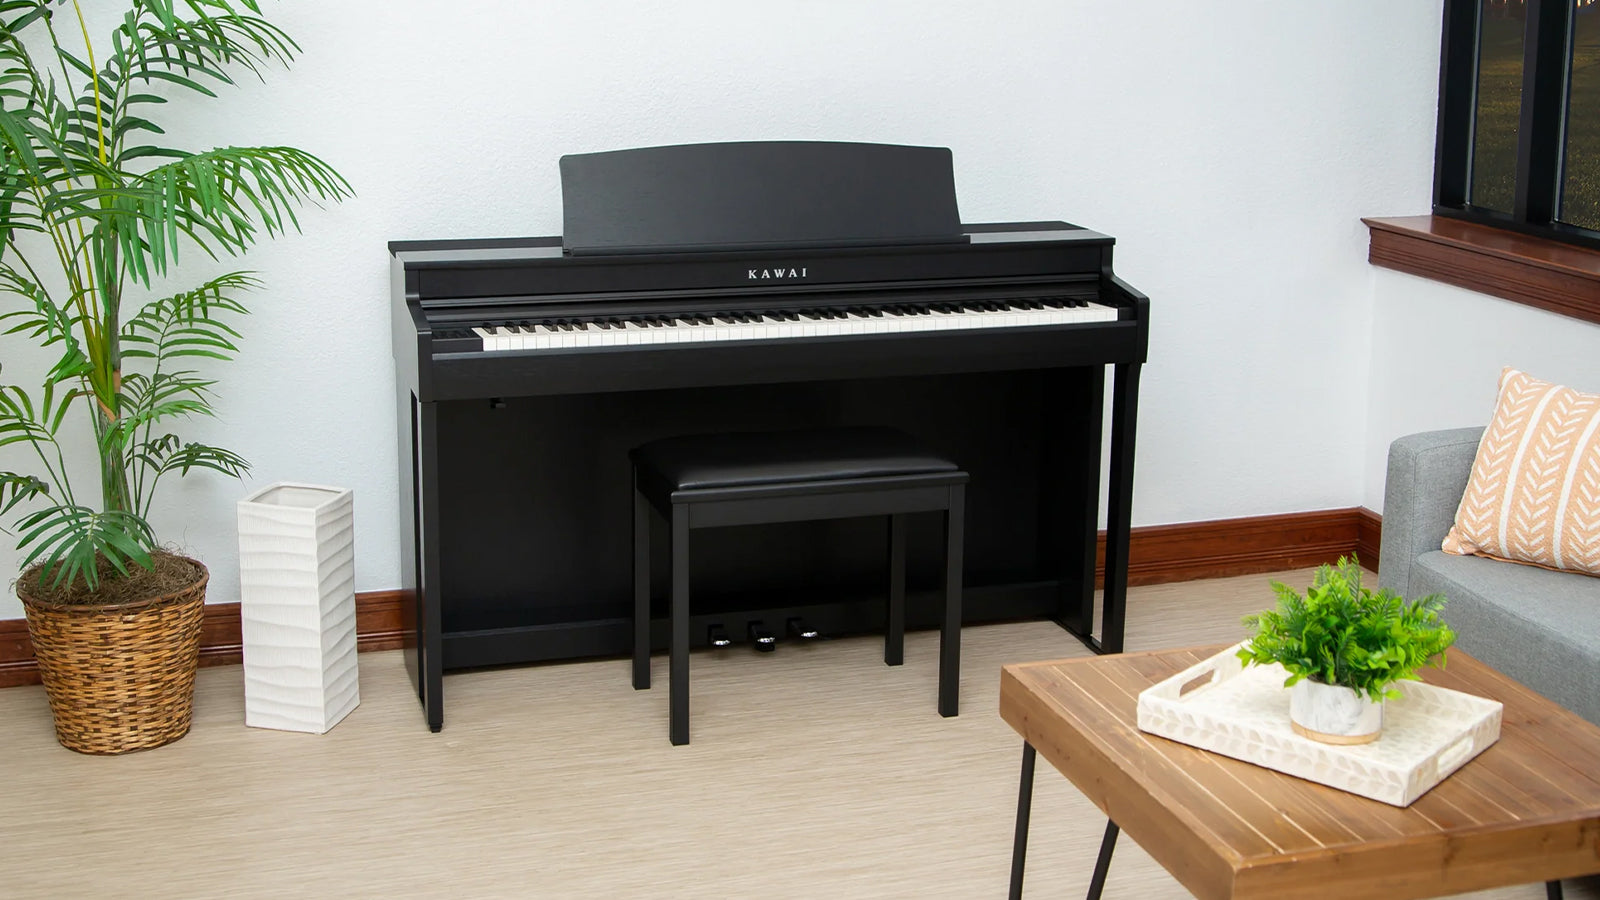 A Kawai CN301 piano in a warm and inviting living space